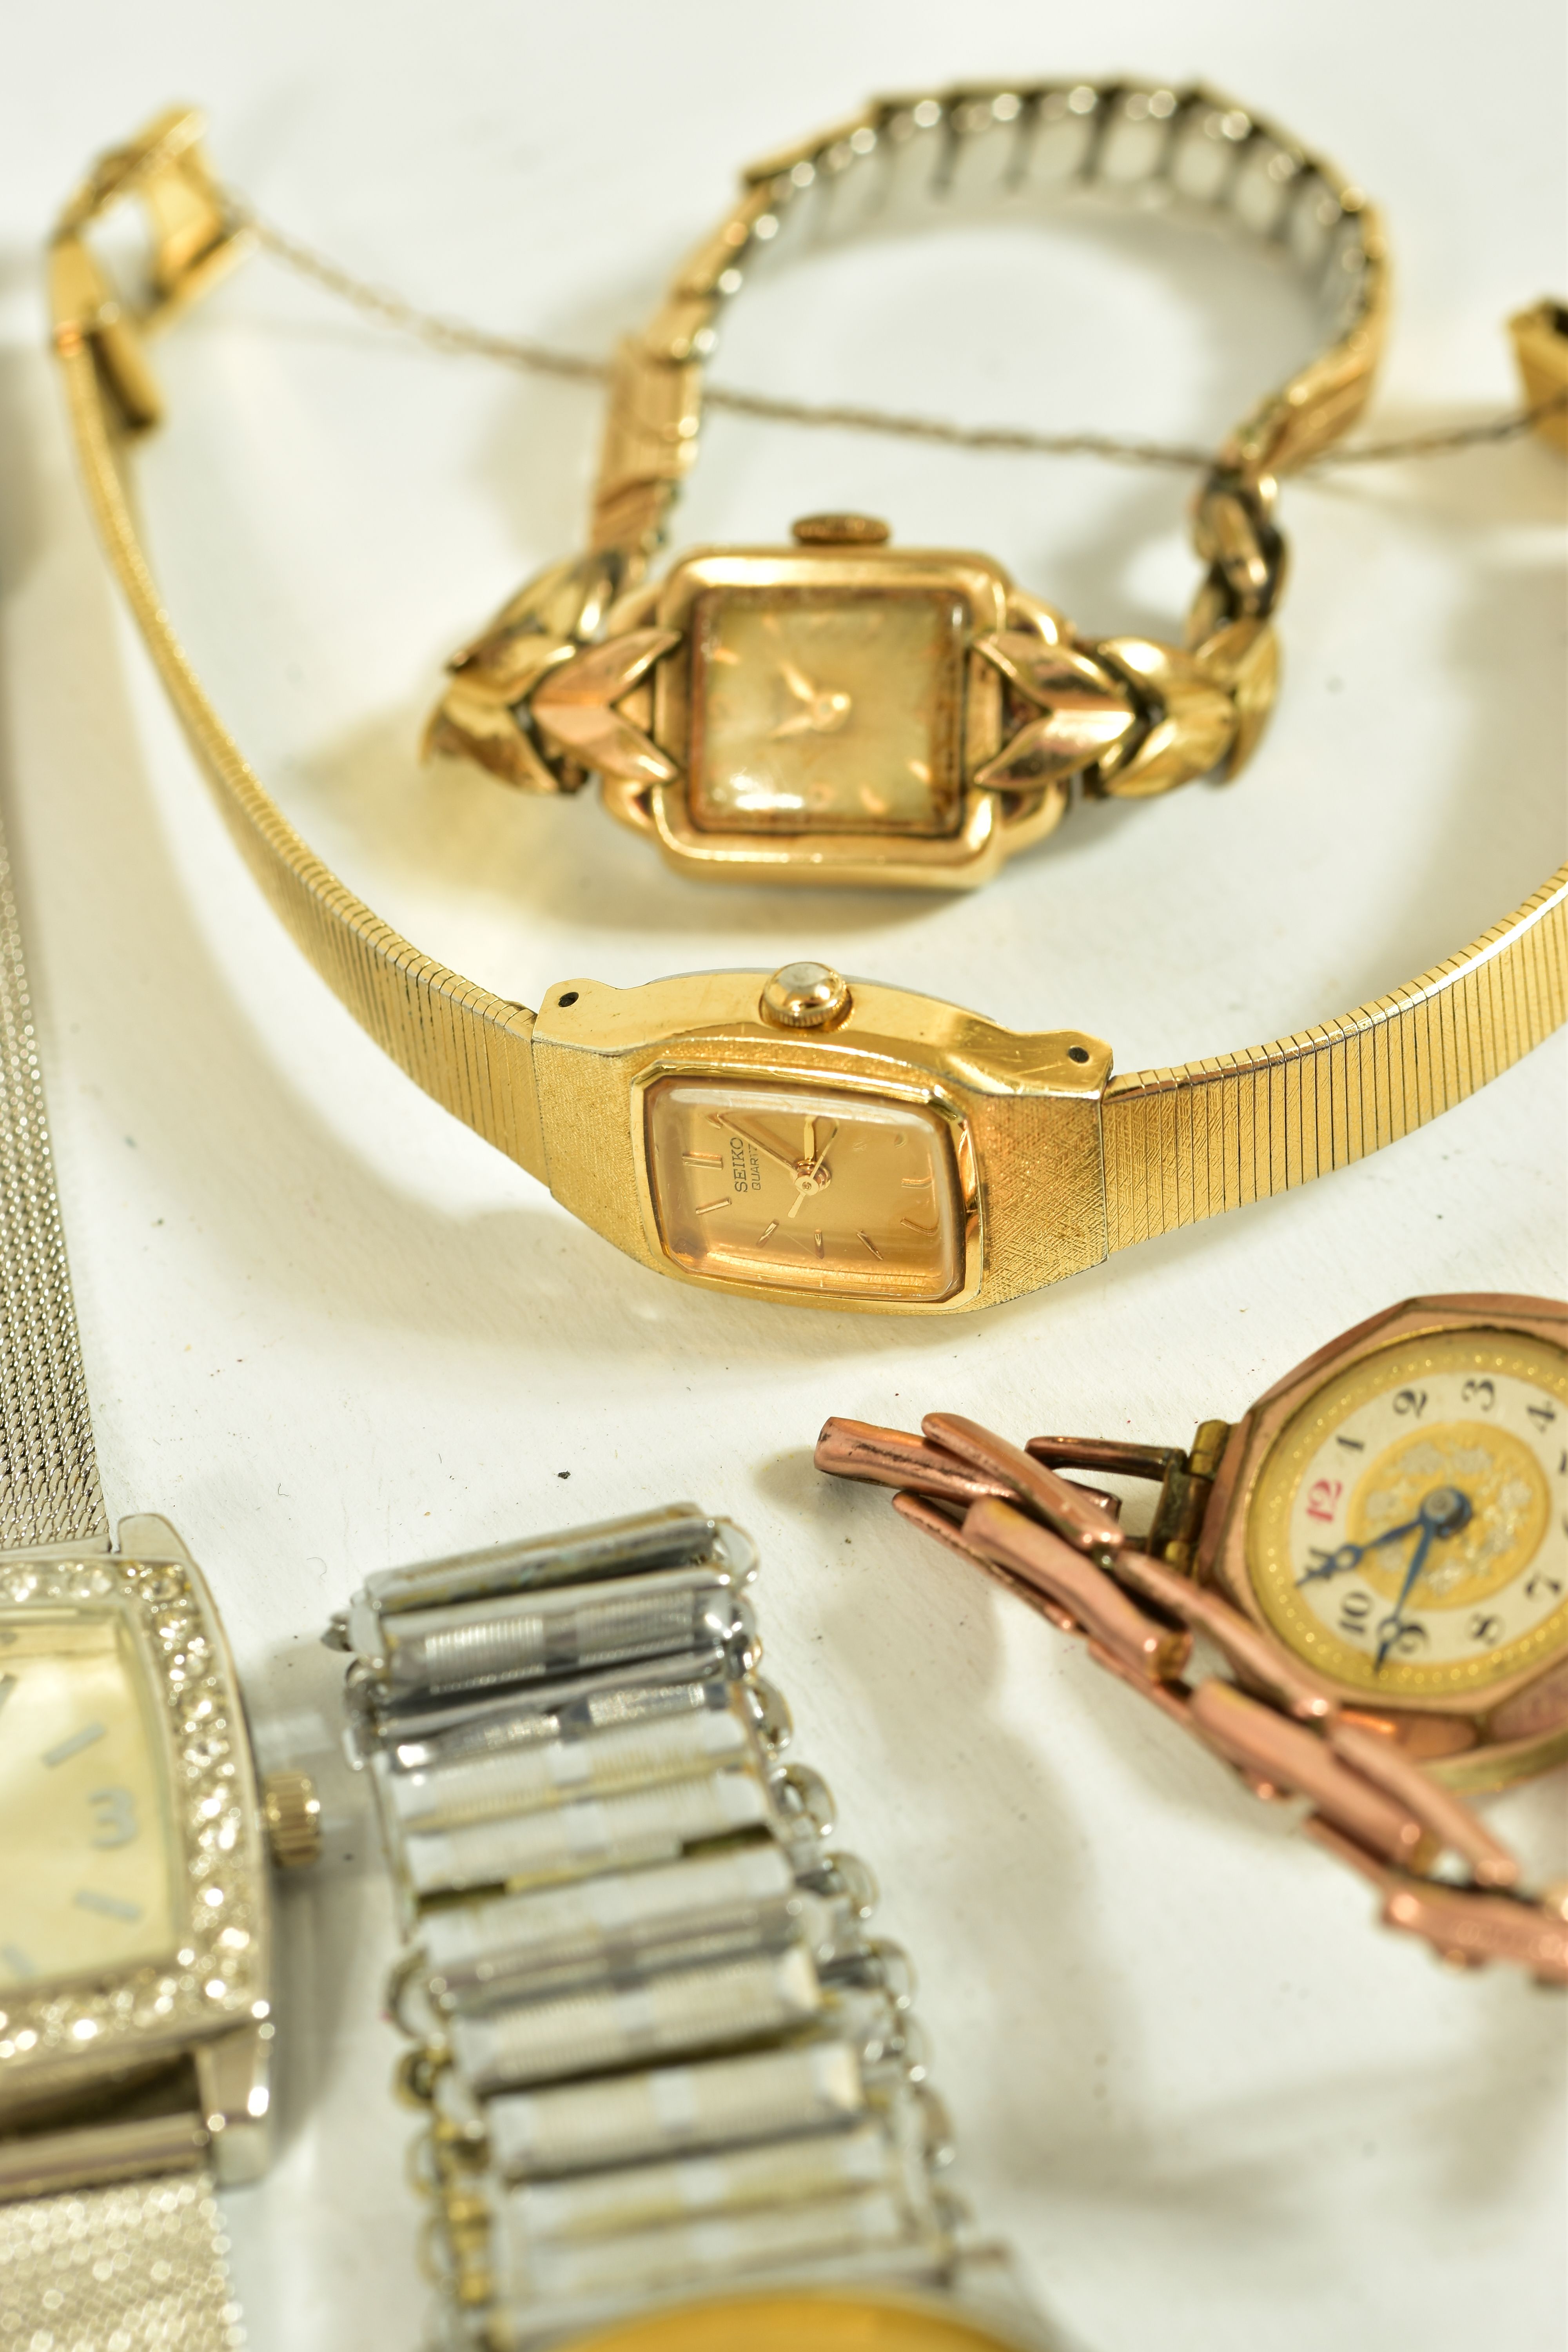 A SELECTION OF LADYS AND GENTLEMENS FASHION WRISTWATCHES, nine watches in total, to include a lady's - Image 4 of 6